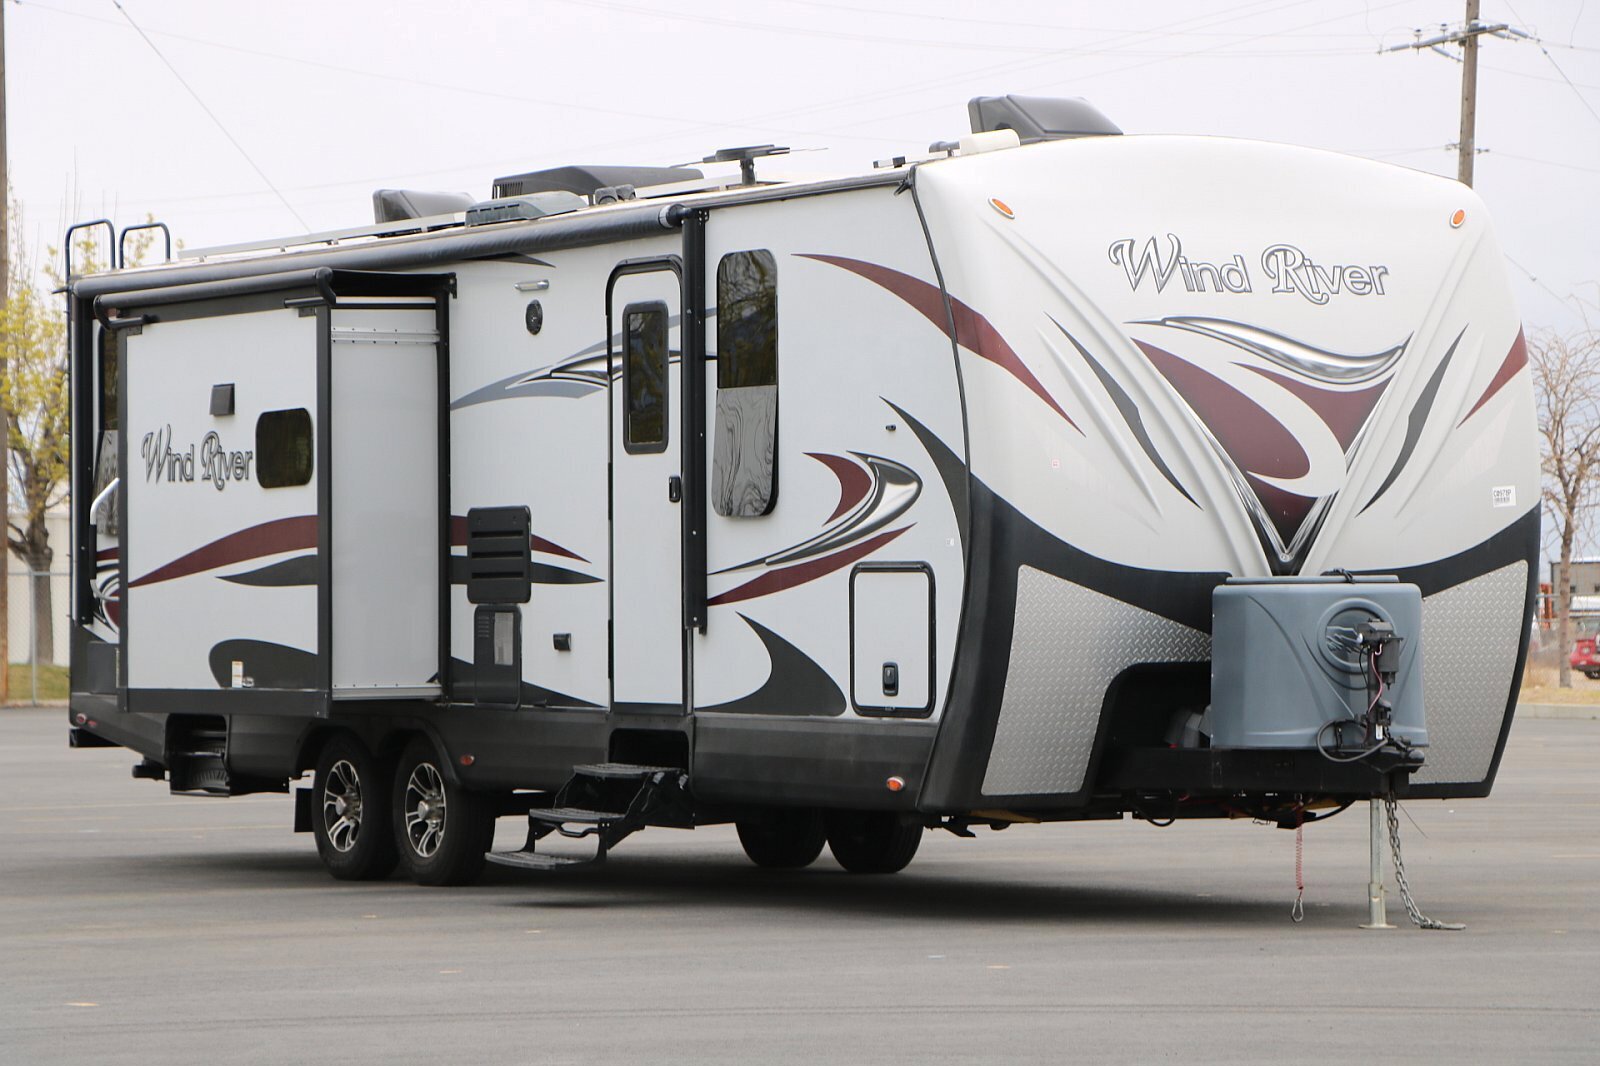 2016 OUTDOORS RV WIND RIVER 270C1SW